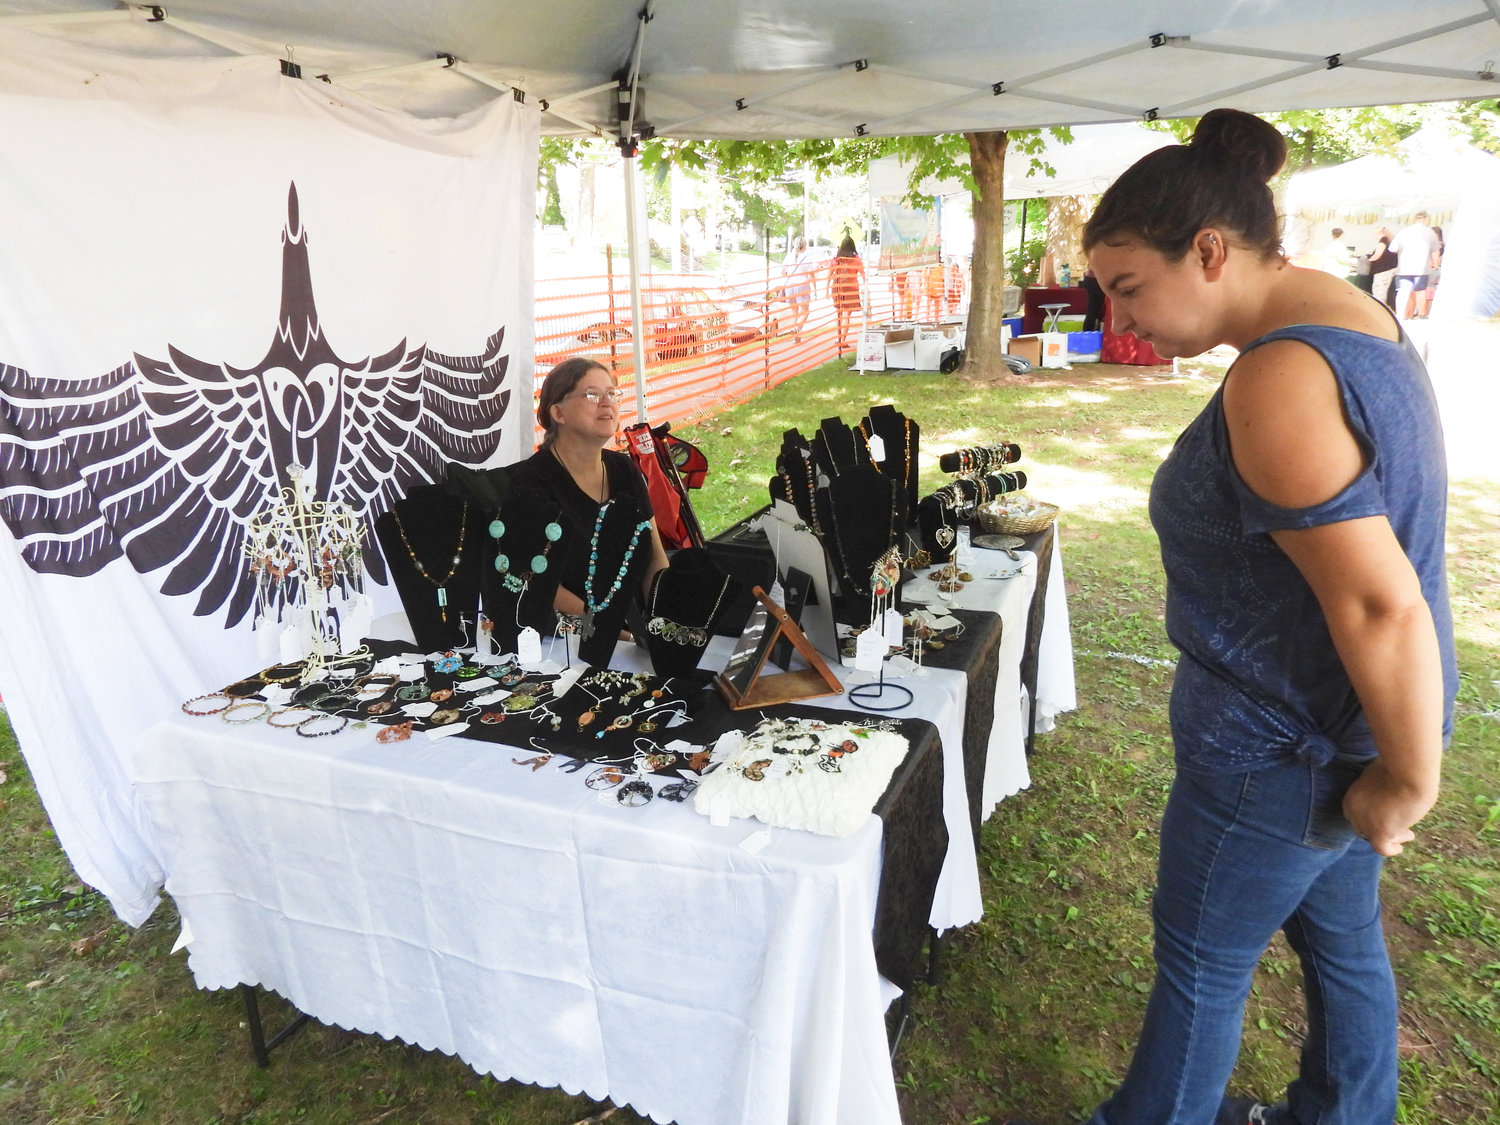 Lisa Fish, left, a resident of Oneida and owner of Magpie Mercantile, sells her handmade jewelry at the 58th Annual Madison County Craft Festival in Oneida, on Sept. 10, 2022.